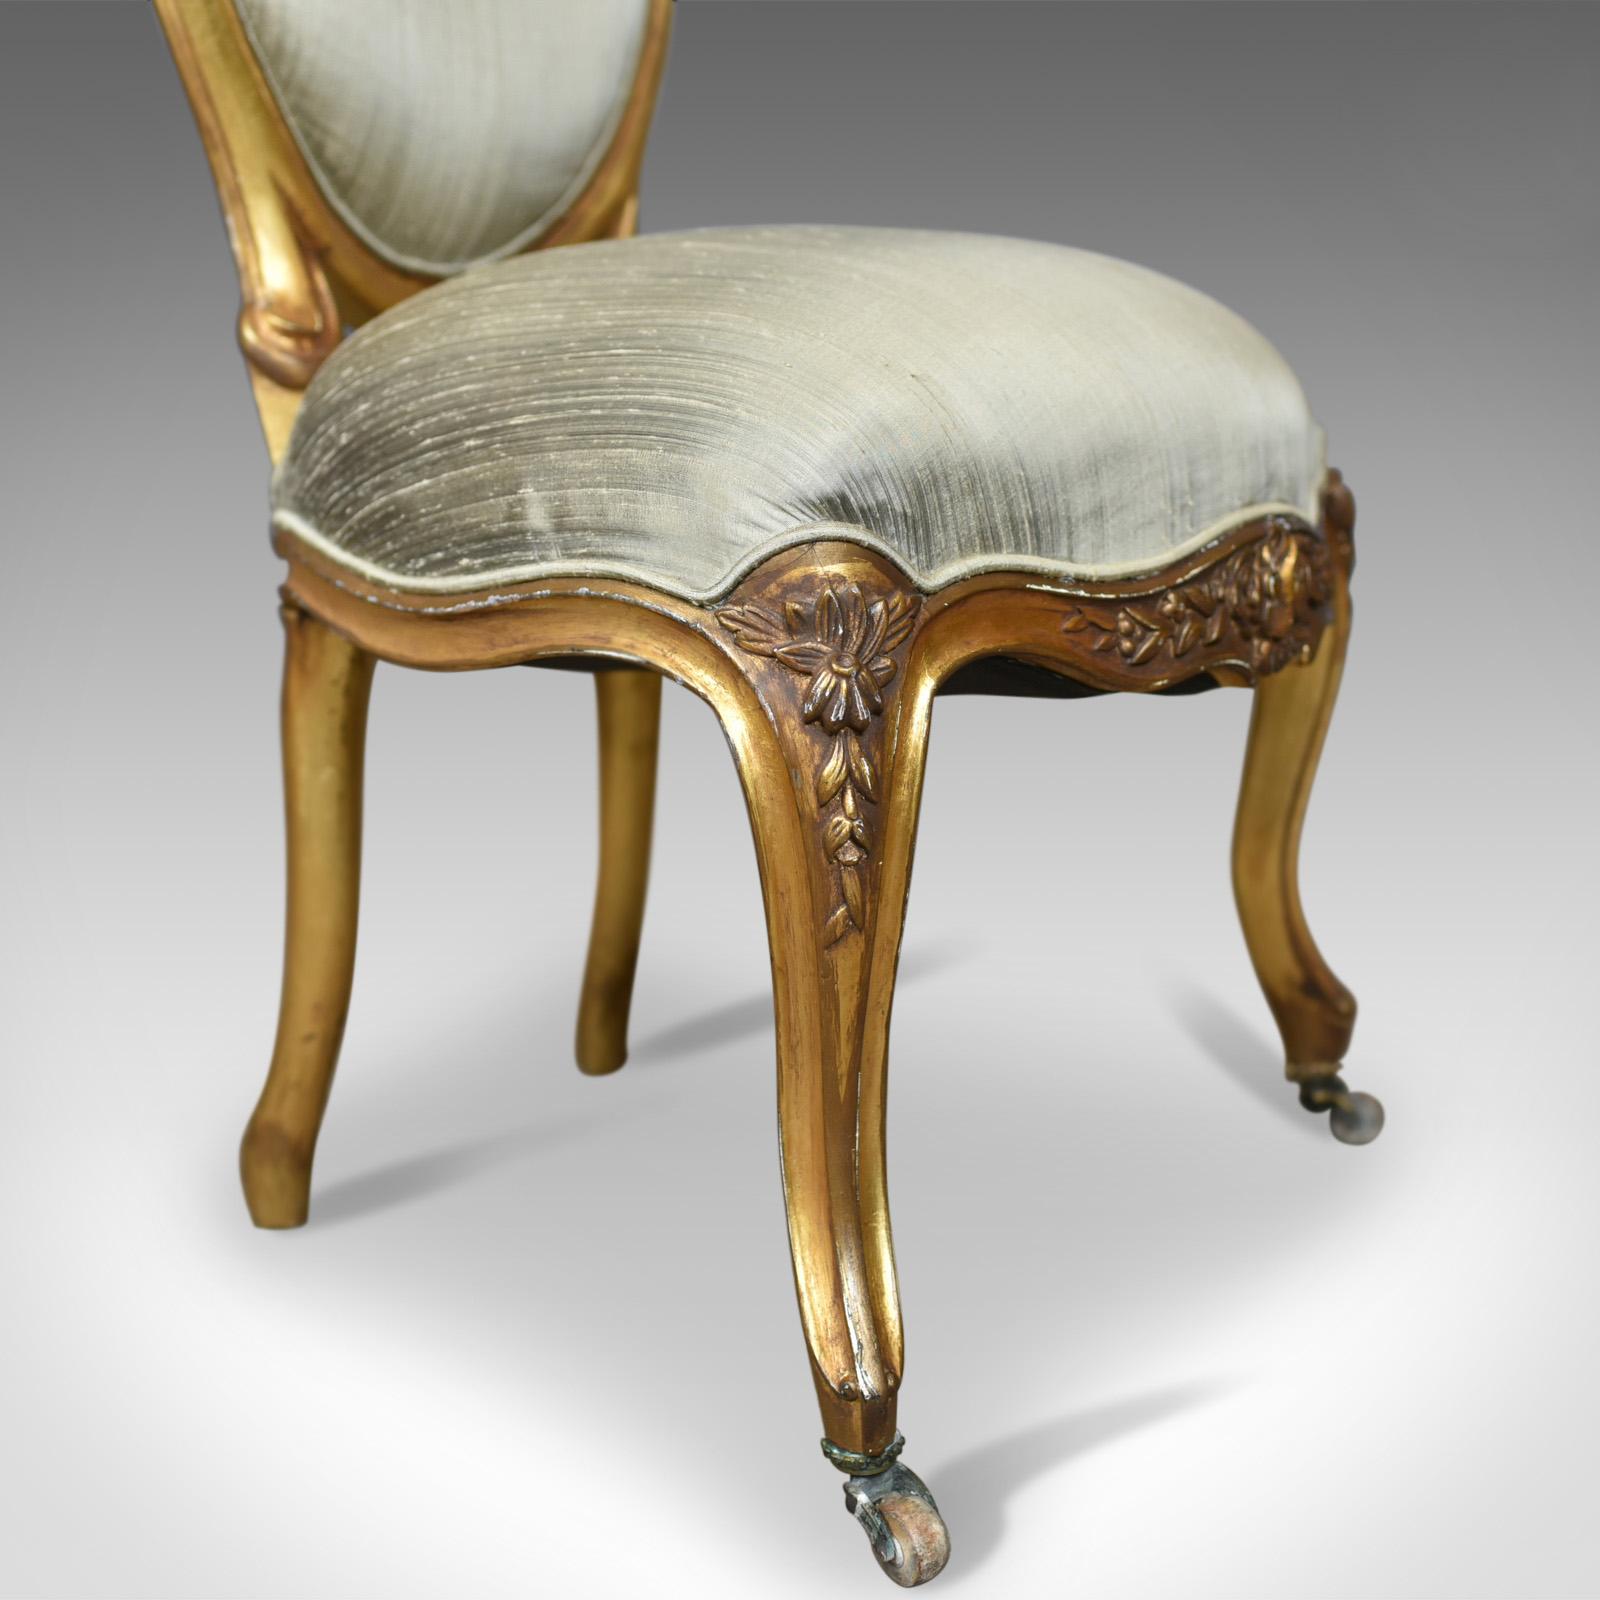 Vintage 20th Century Salon Chair in Antique French Taste, Giltwood, circa 1970 For Sale 2